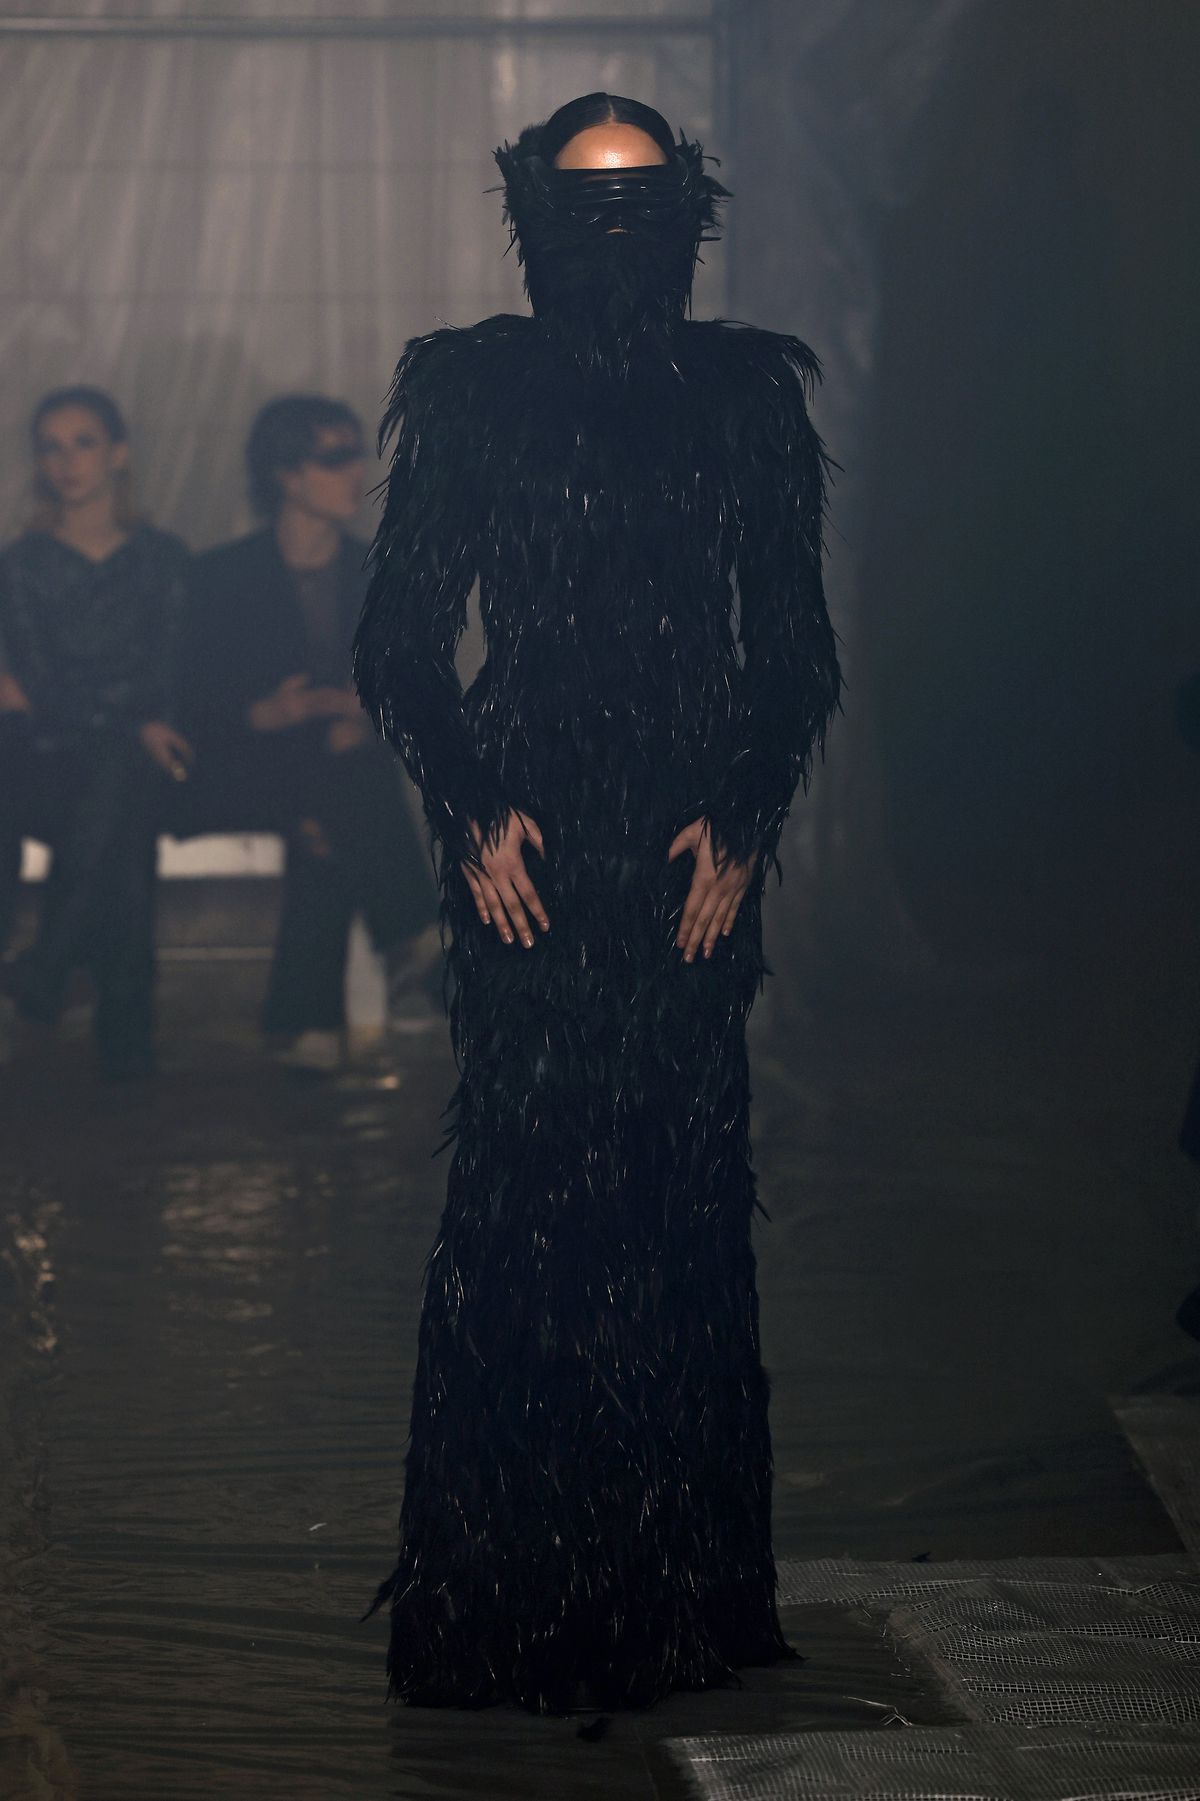 A model wearing a long black feathered dress and face-obscuring sunglasses walks the runway at the Han Kjobenhavn fashion show at Milan Fashion Week.